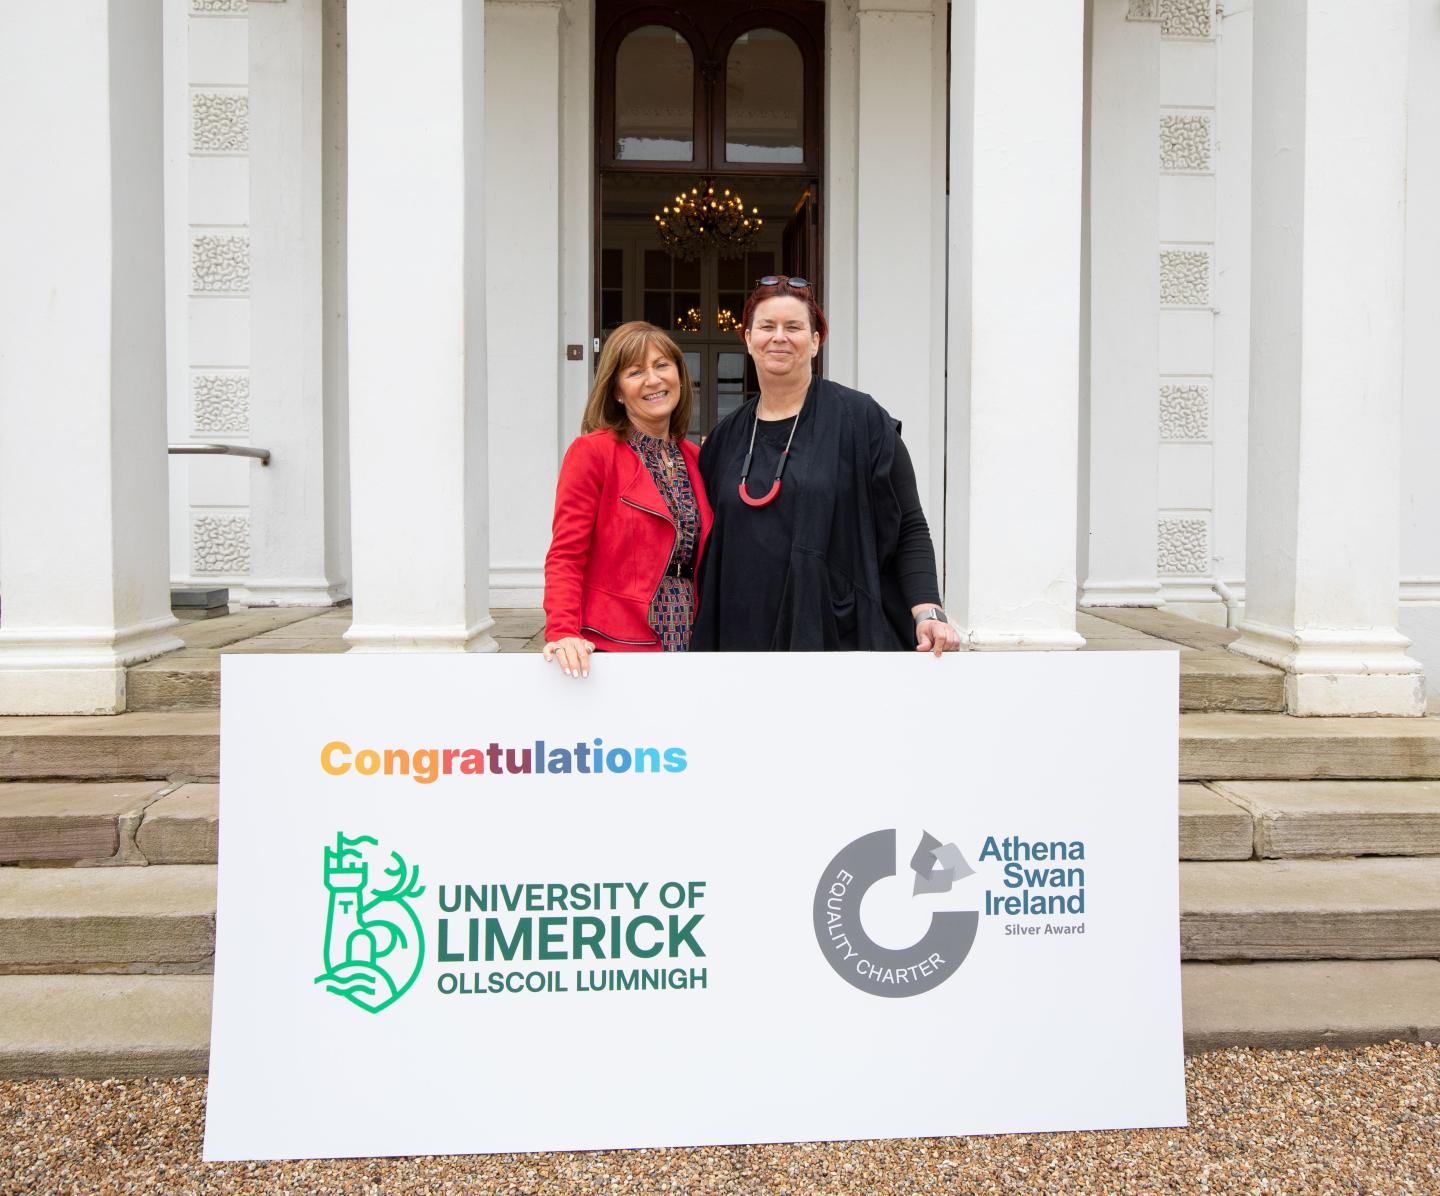 TWo women hold a sign with University of Limerick and Athena Swan logo outside impressive building